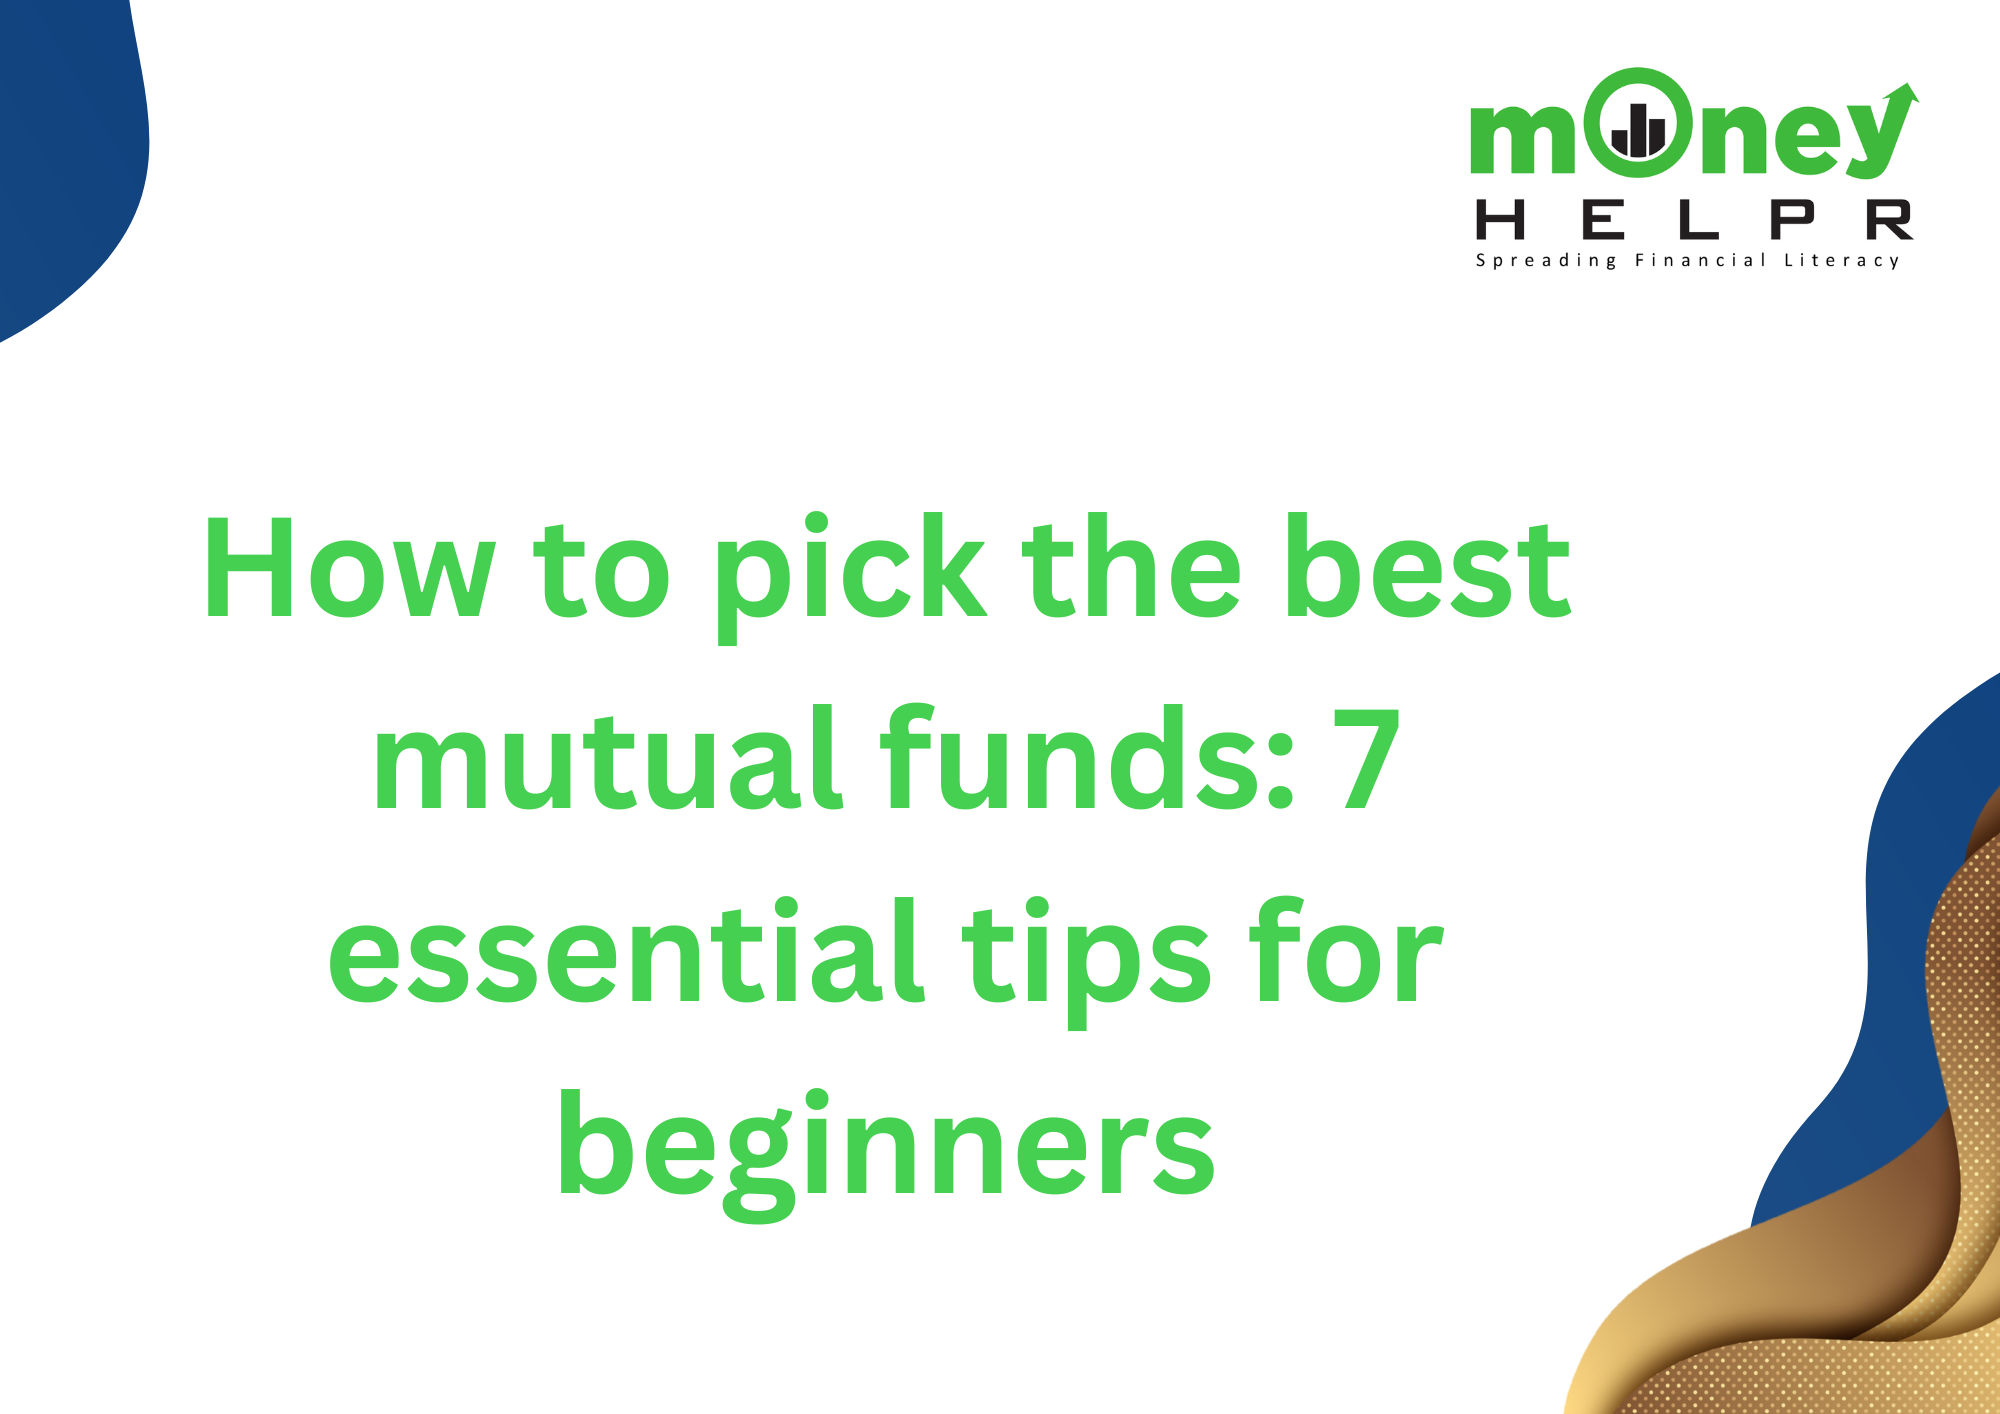 How to pick the best mutual funds: 7 essential tips for beginners